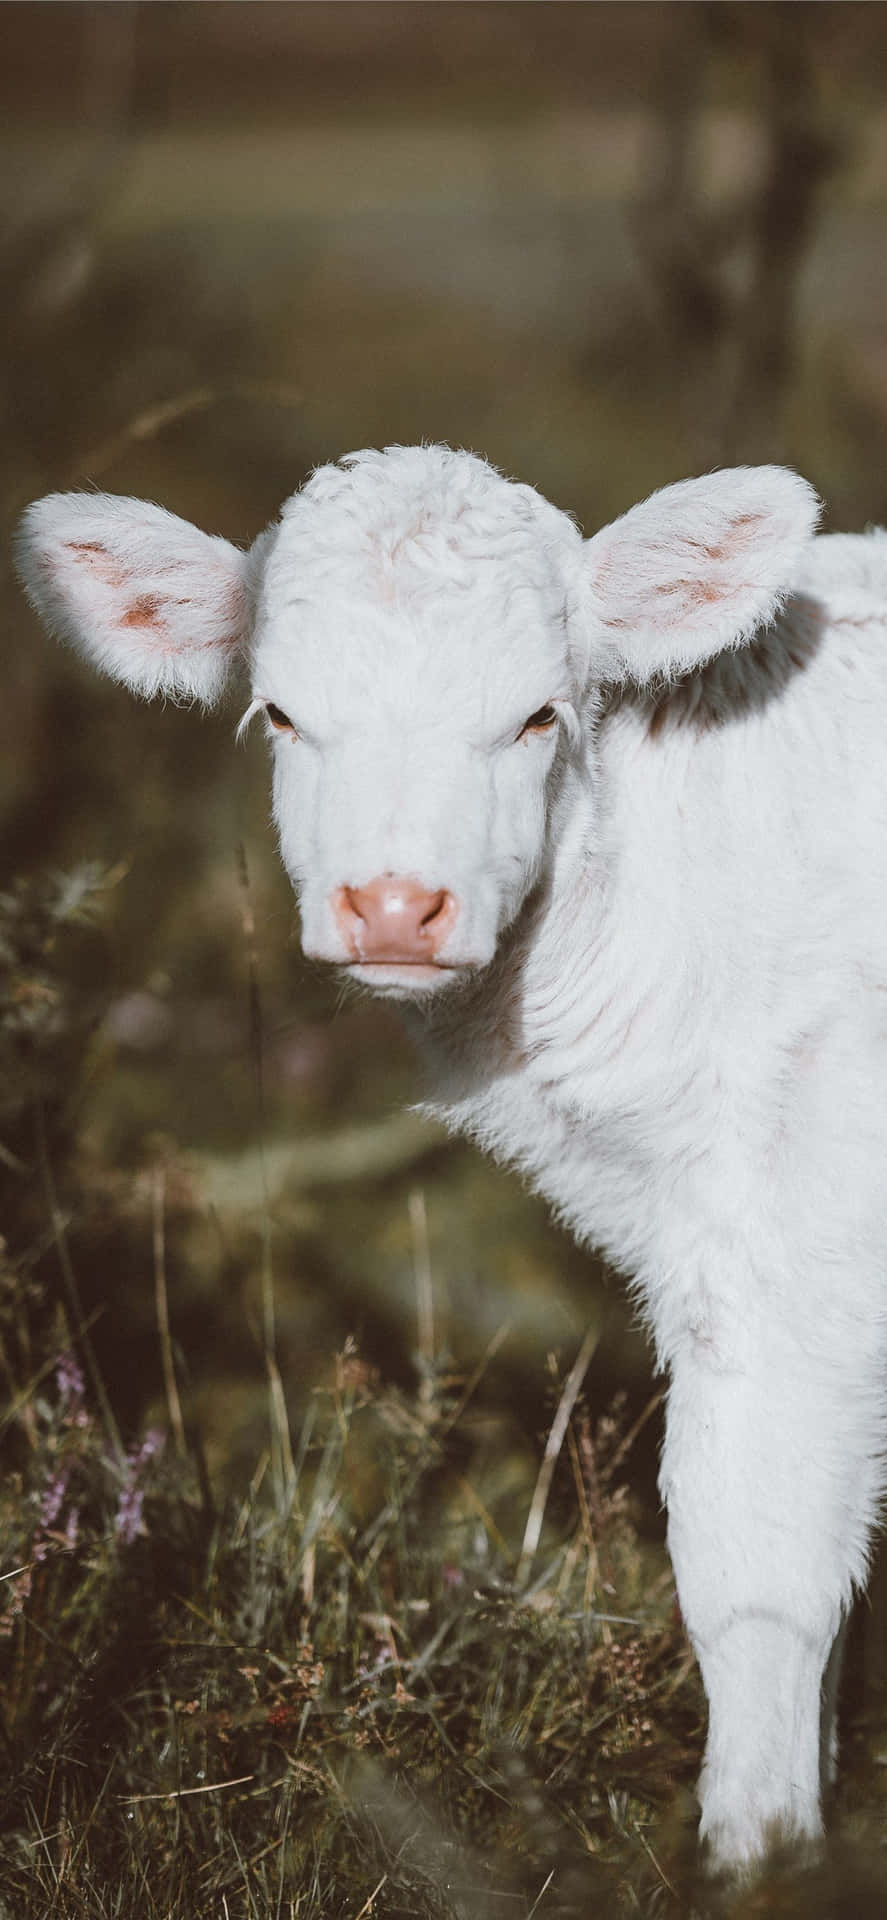 A White Calf Standing In The Grass Background